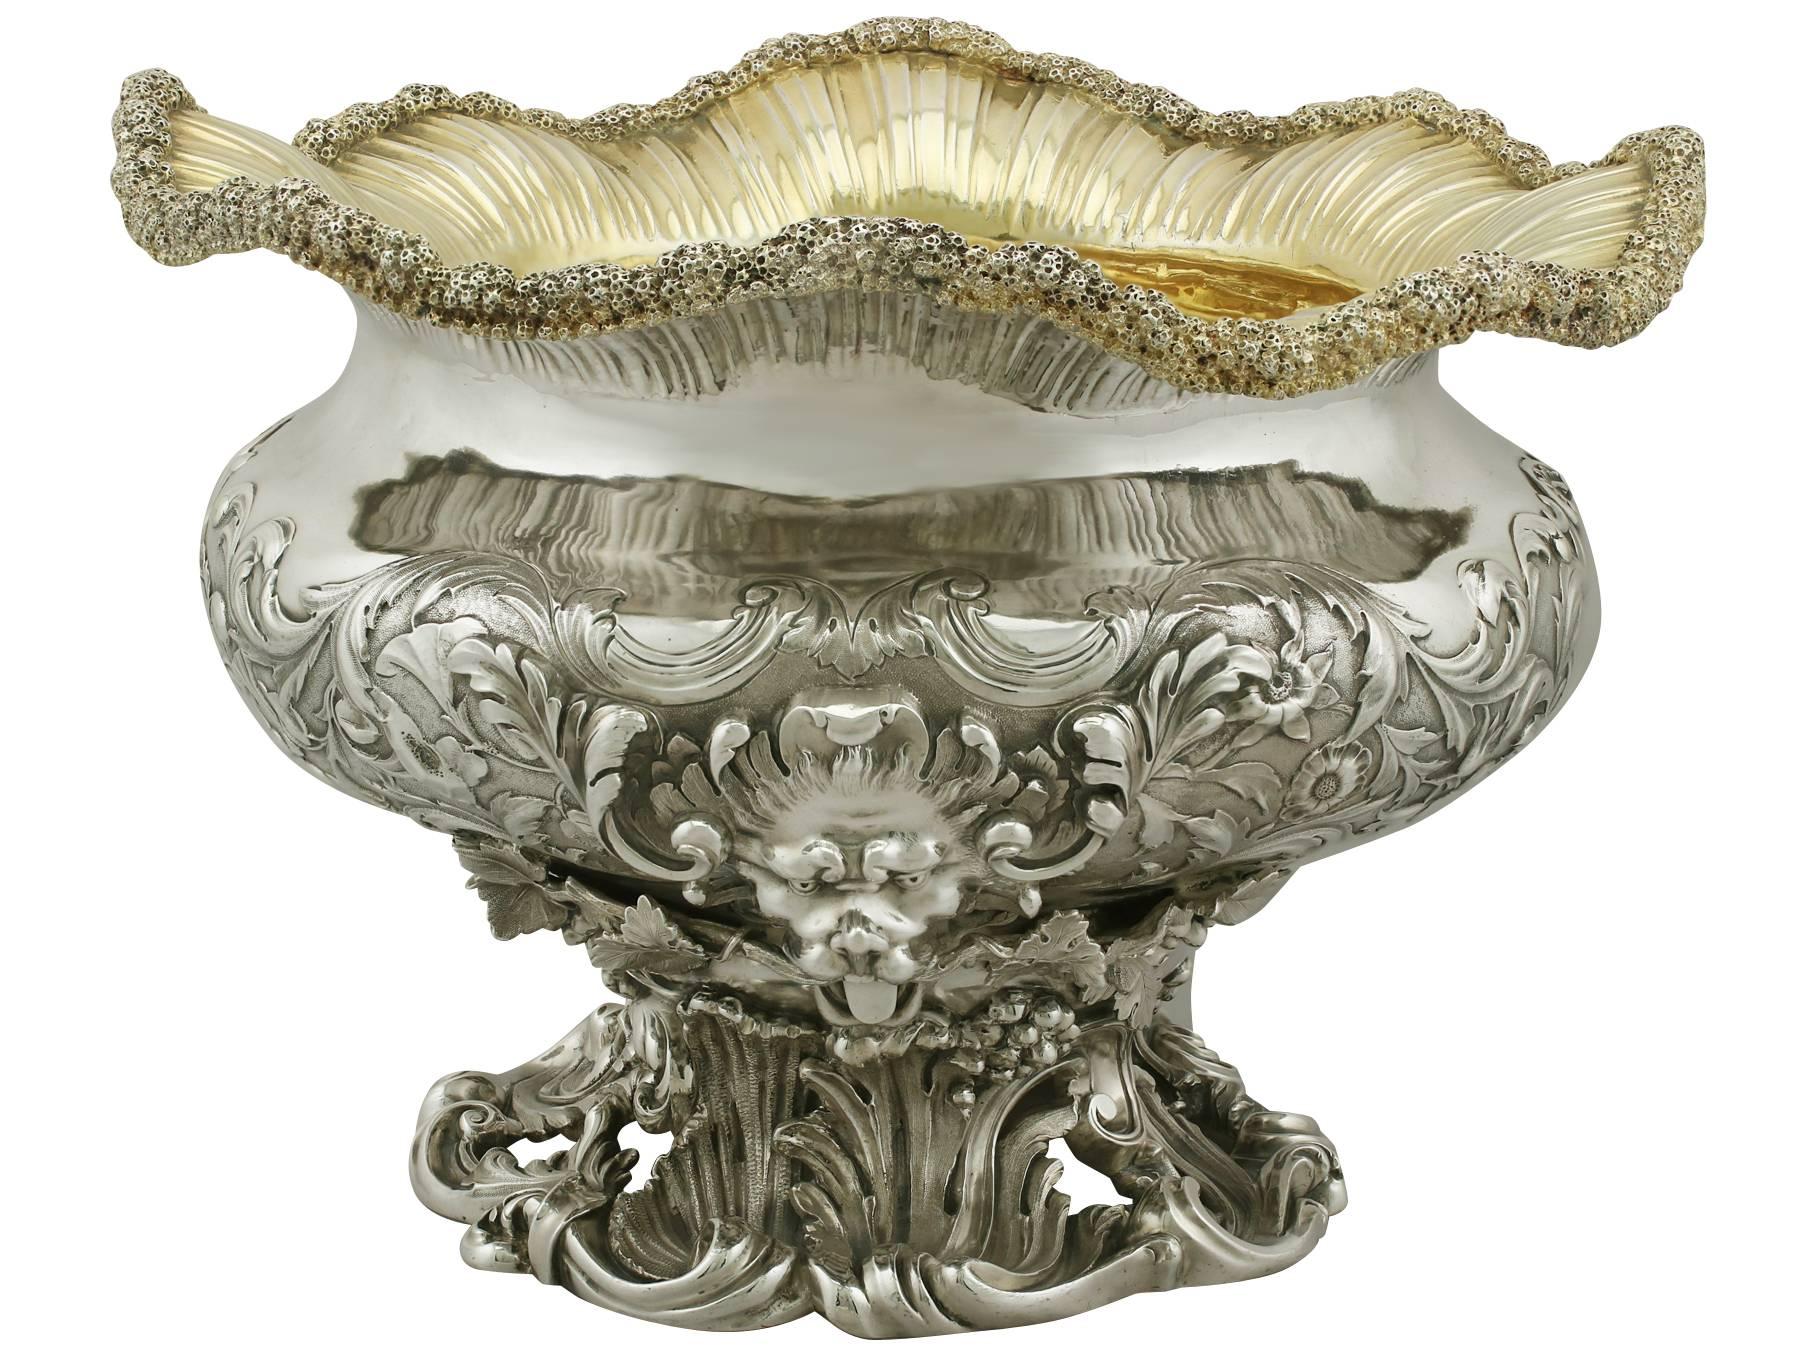 A magnificent, fine and impressive antique William IV English sterling silver presentation bowl made by William Bateman II; an addition to our ornamental silverware collection

This magnificent antique William IV sterling silver decorative bowl has